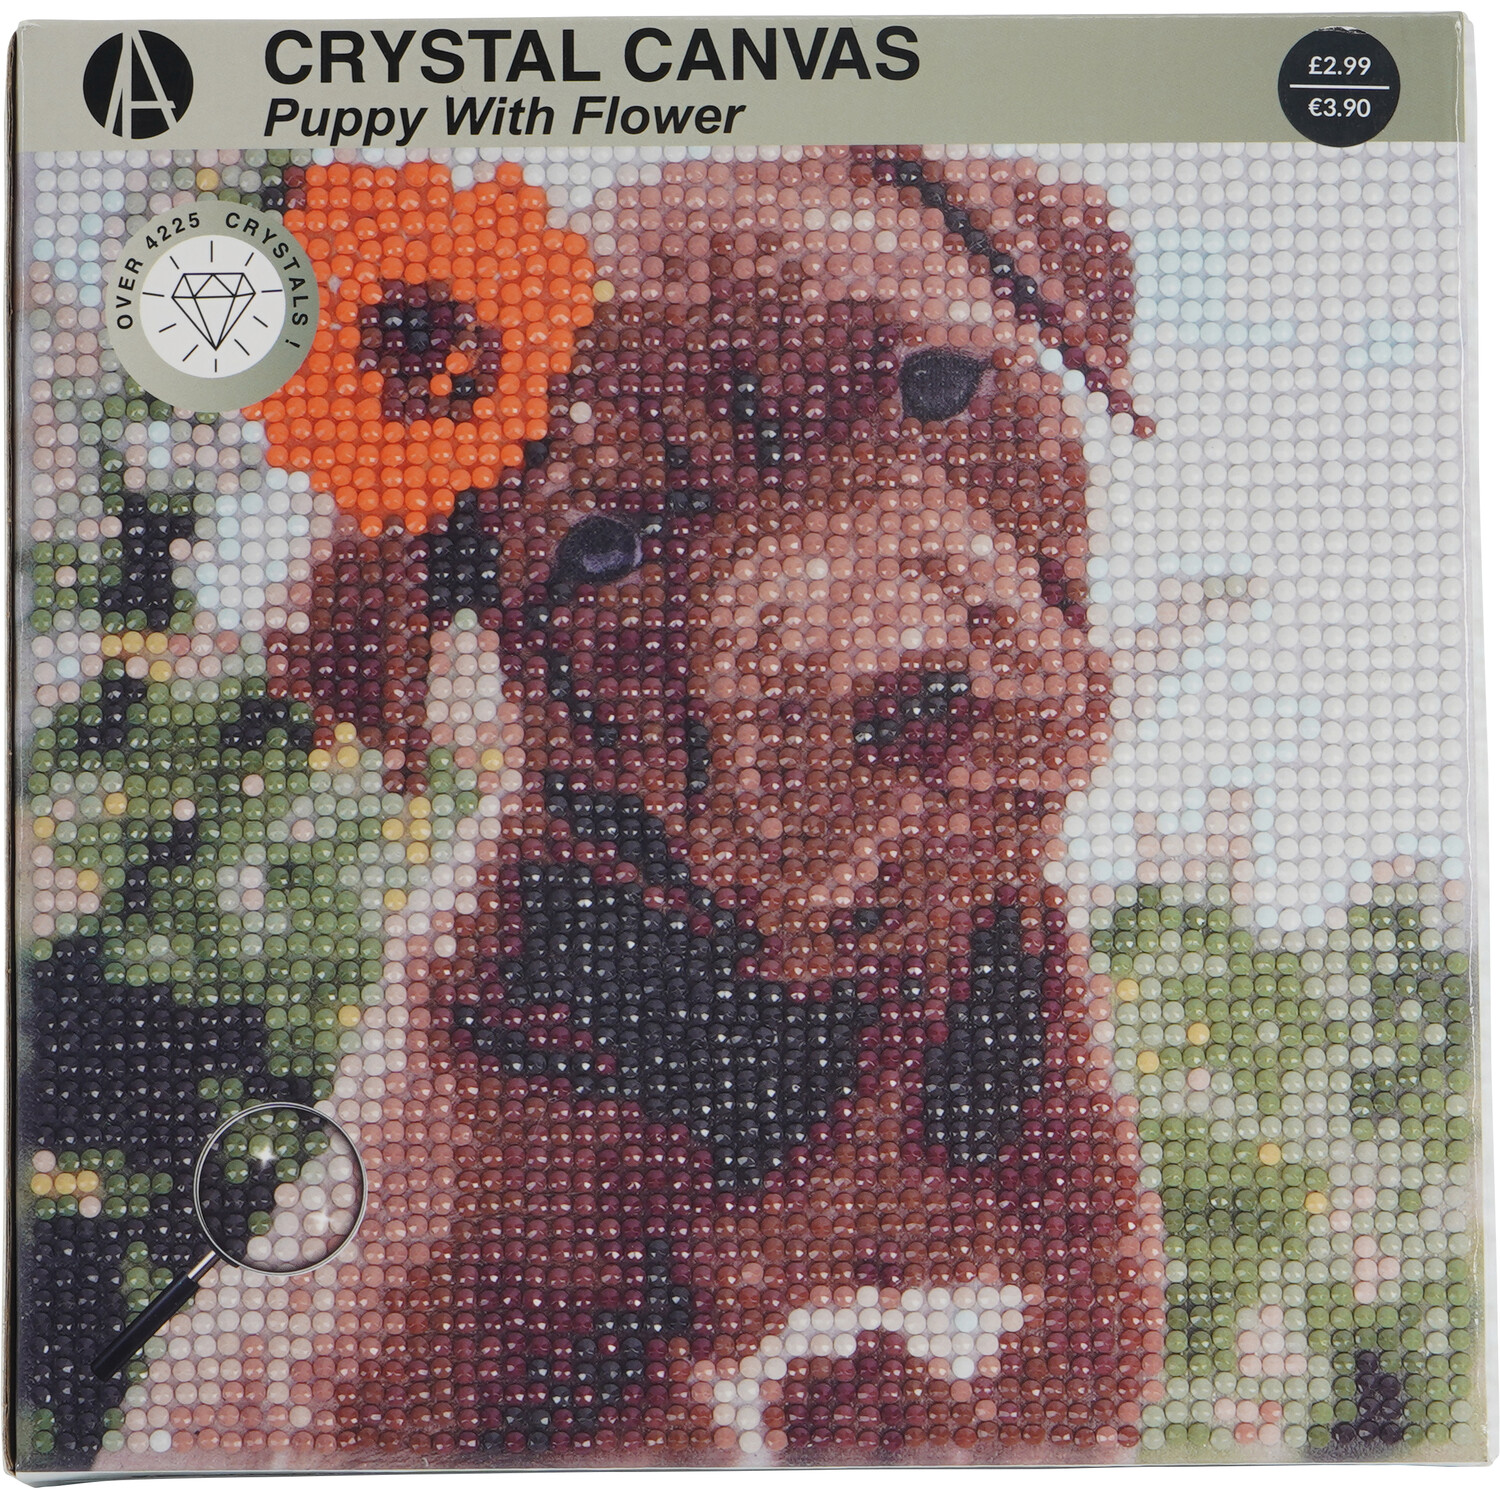 Crystal Canvas Cat or Puppy with Flower Image 1